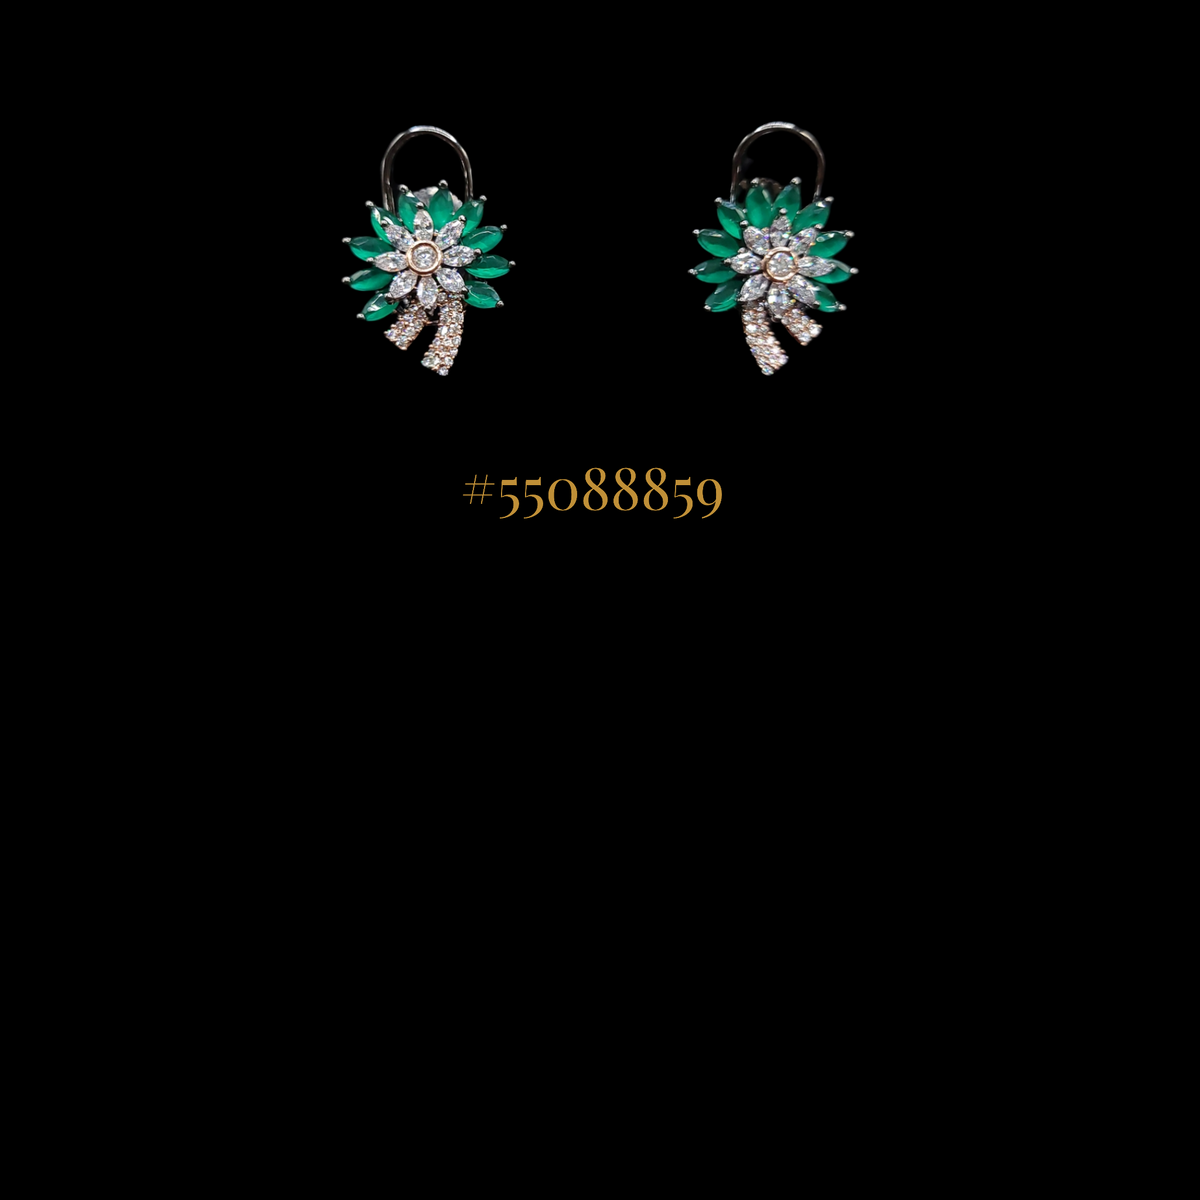 PRECIOUS SMALL SIZE EARRINGS WITH DIAMONDS